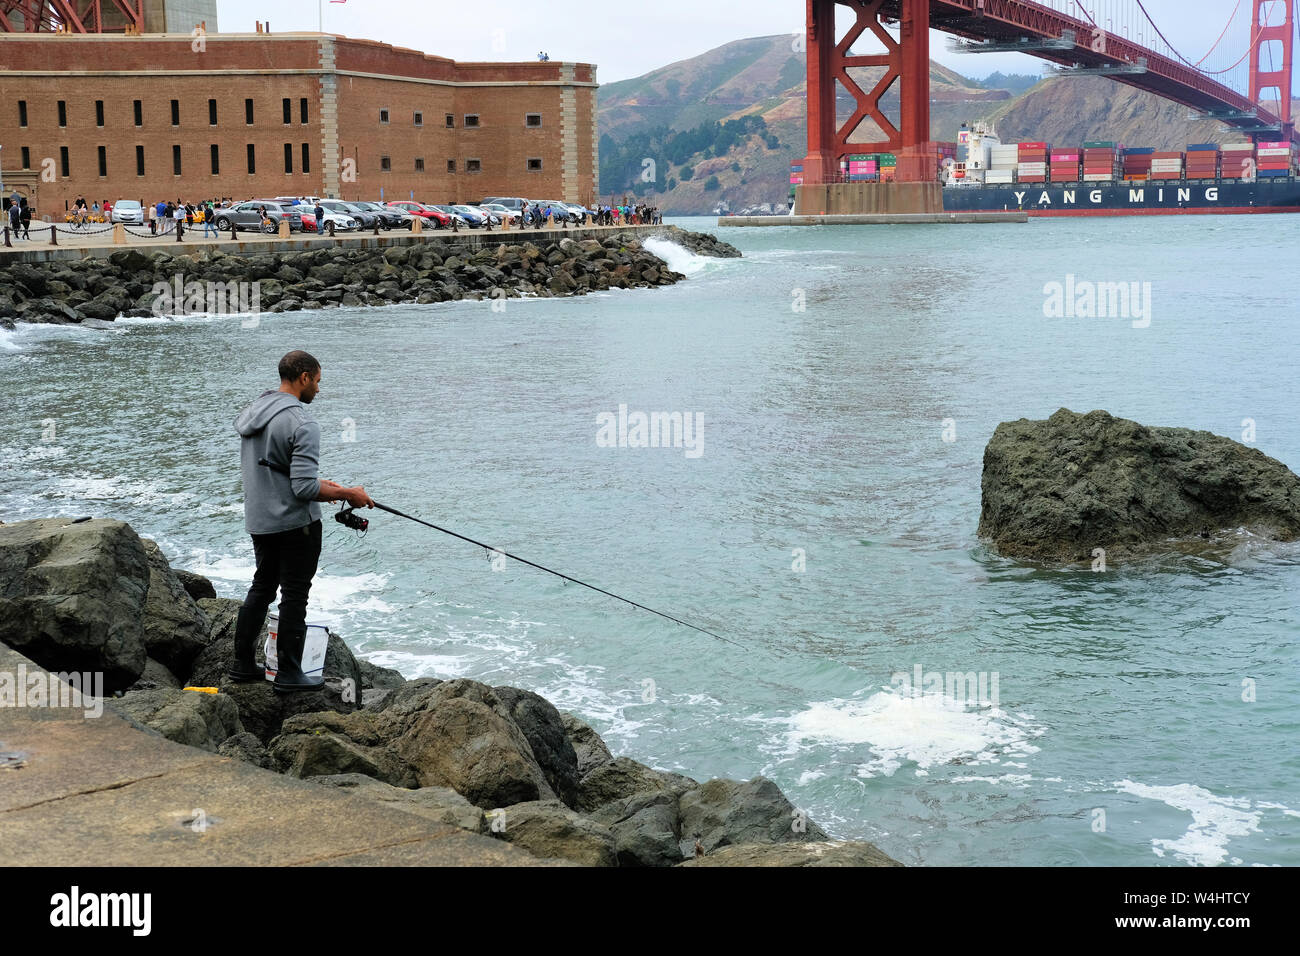 Young African American male fishing while a Yang Ming marine transport vessel sails under the Golden Gate Bridge in San Francisco, California. Stock Photo